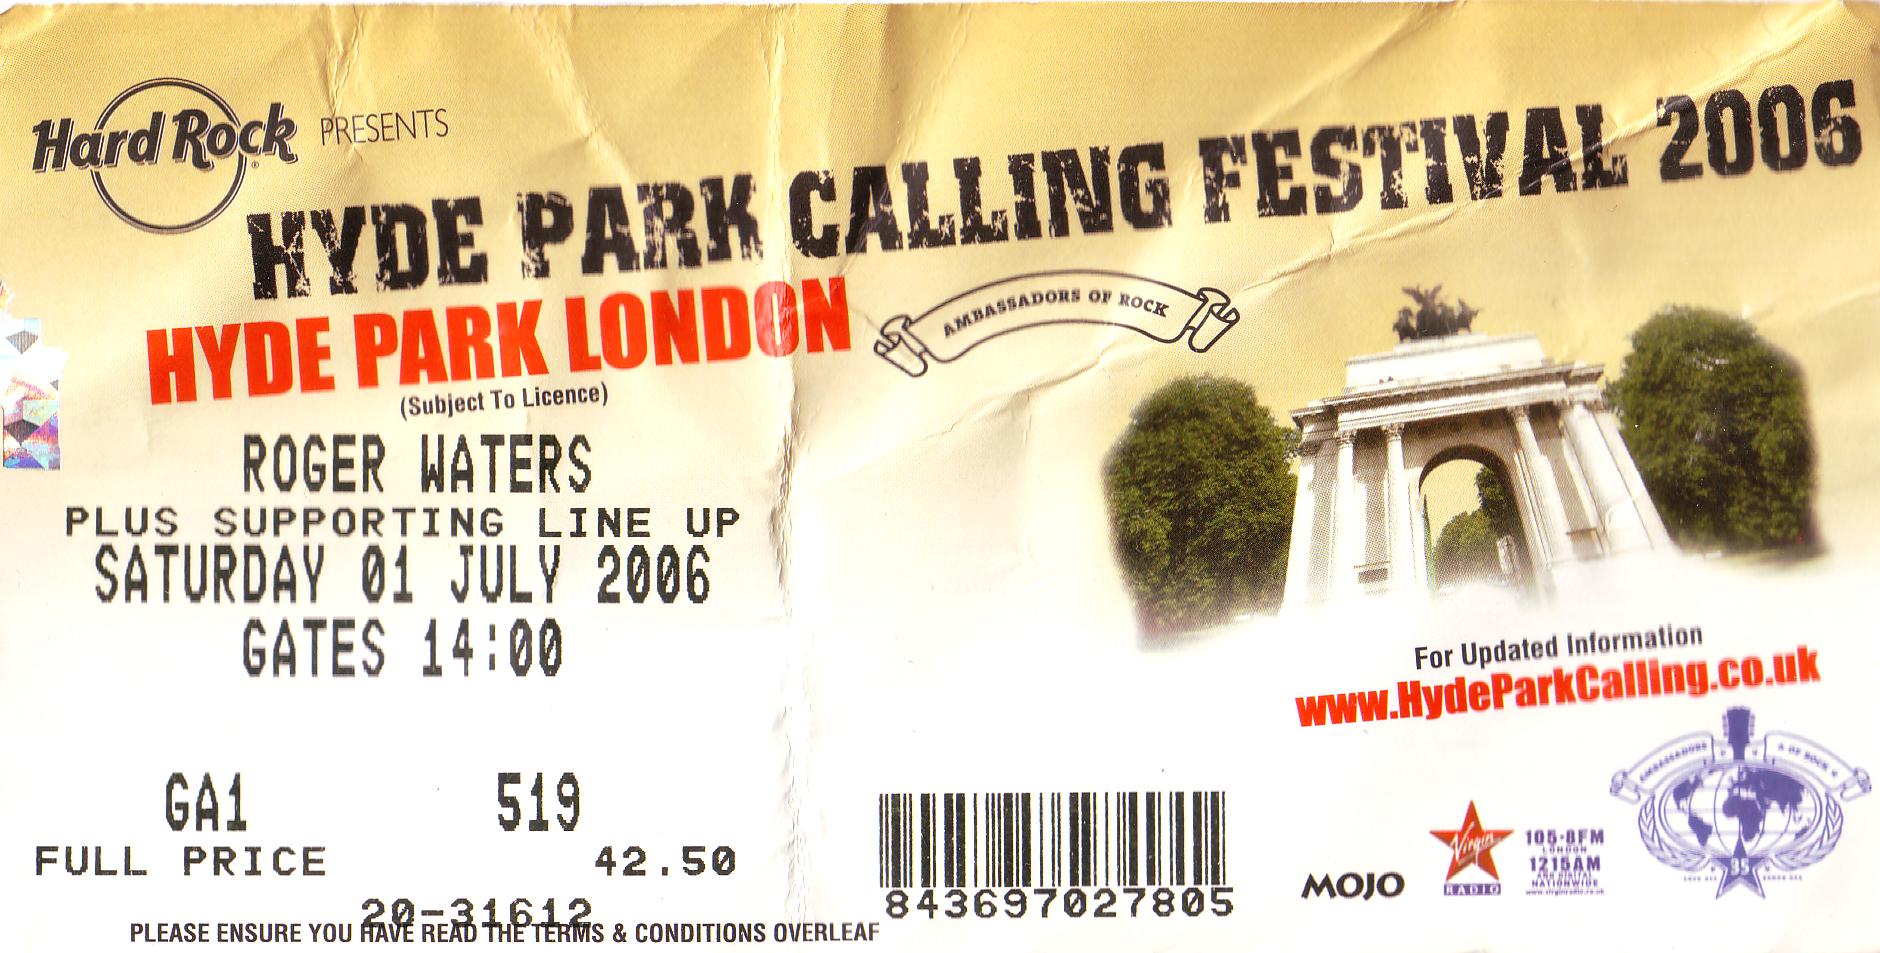 2006-07-01-Roger Waters: Hyde Park Calling